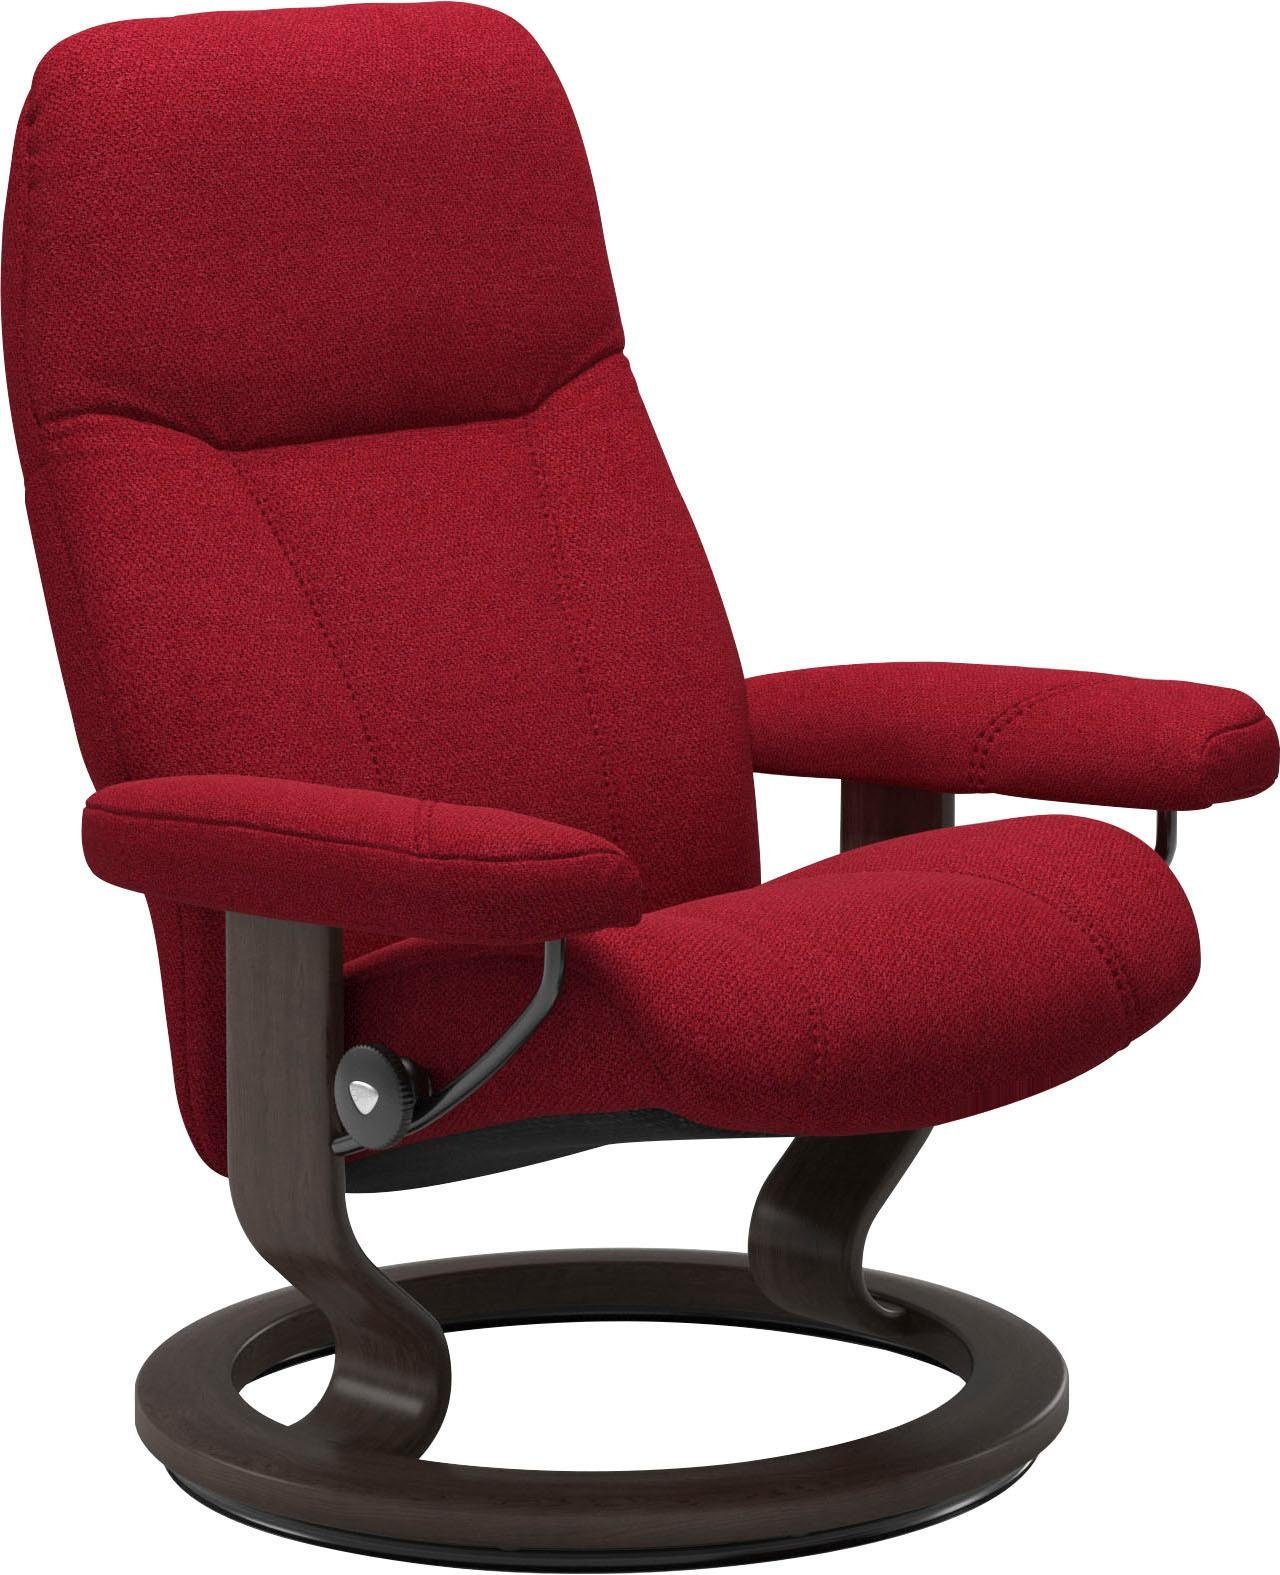 Stressless® Relaxsessel Consul, mit Classic Base, Größe L, Gestell Wenge